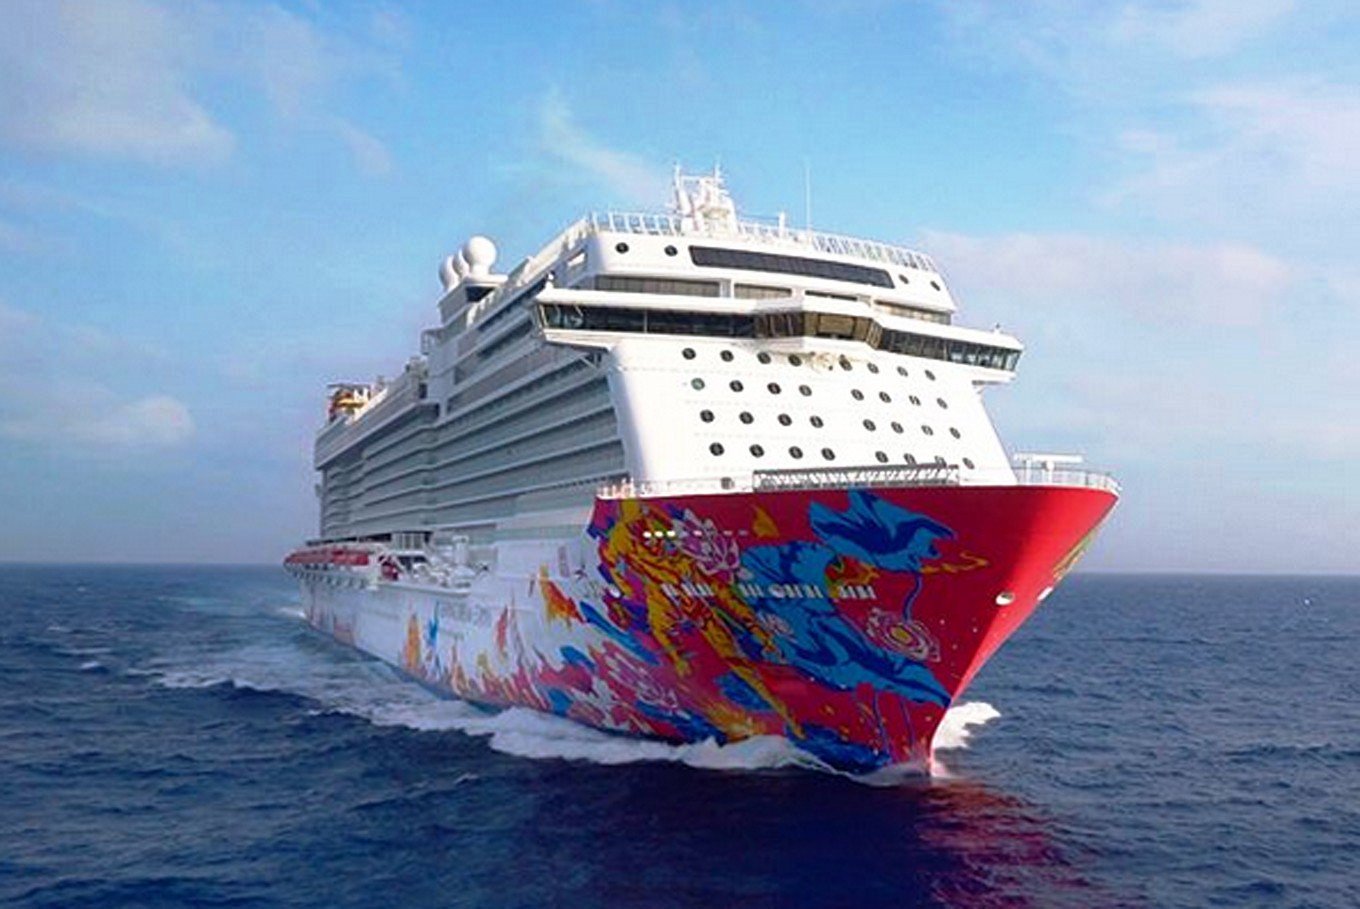 Genting Dream cruise ship to dock in Tanjung Priok in April - Tourism